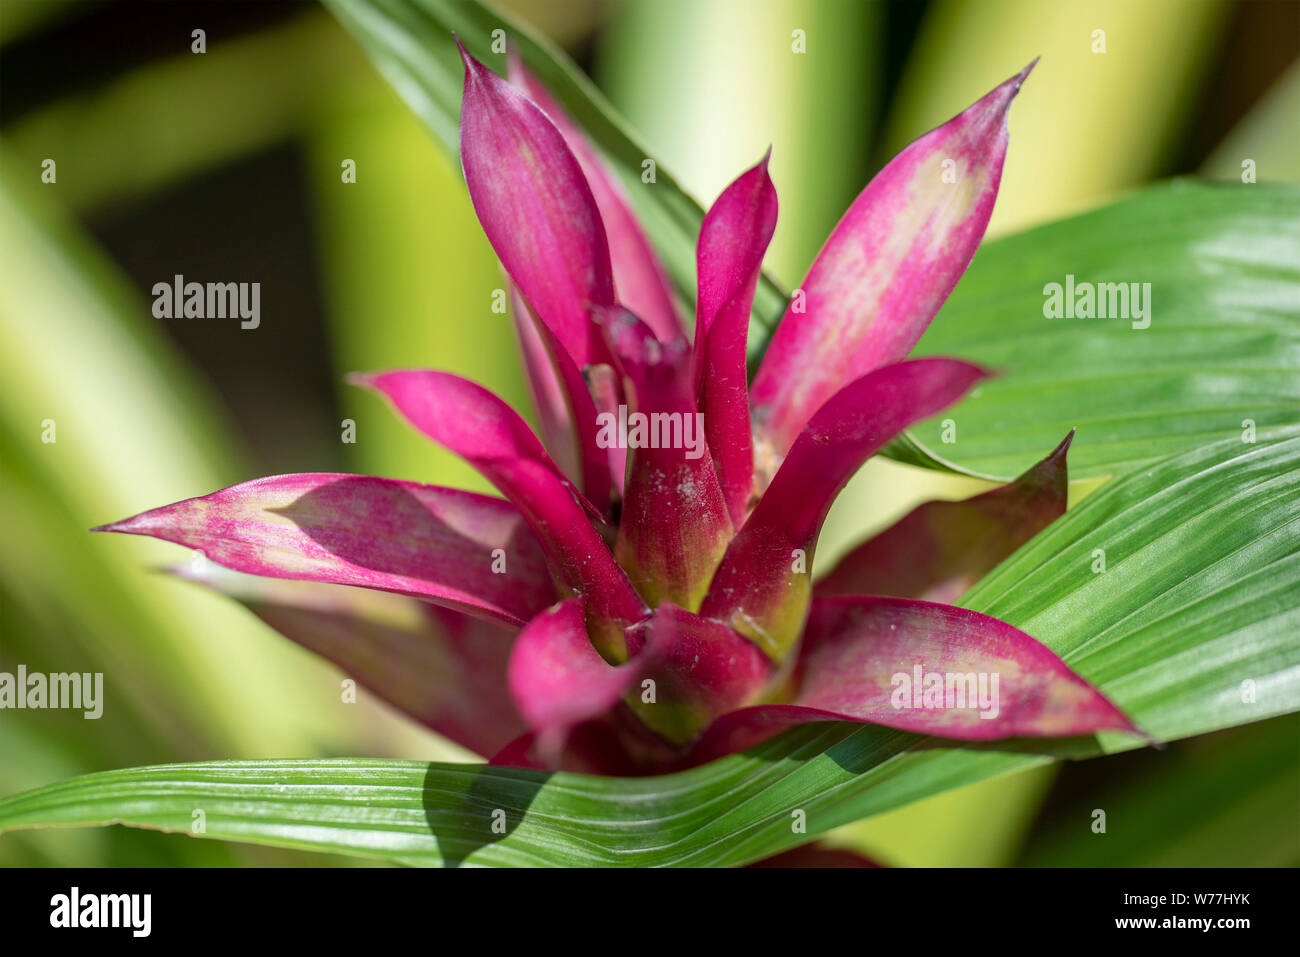 Guzmania - a flower close-up in natural light. Thailand. Stock Photo